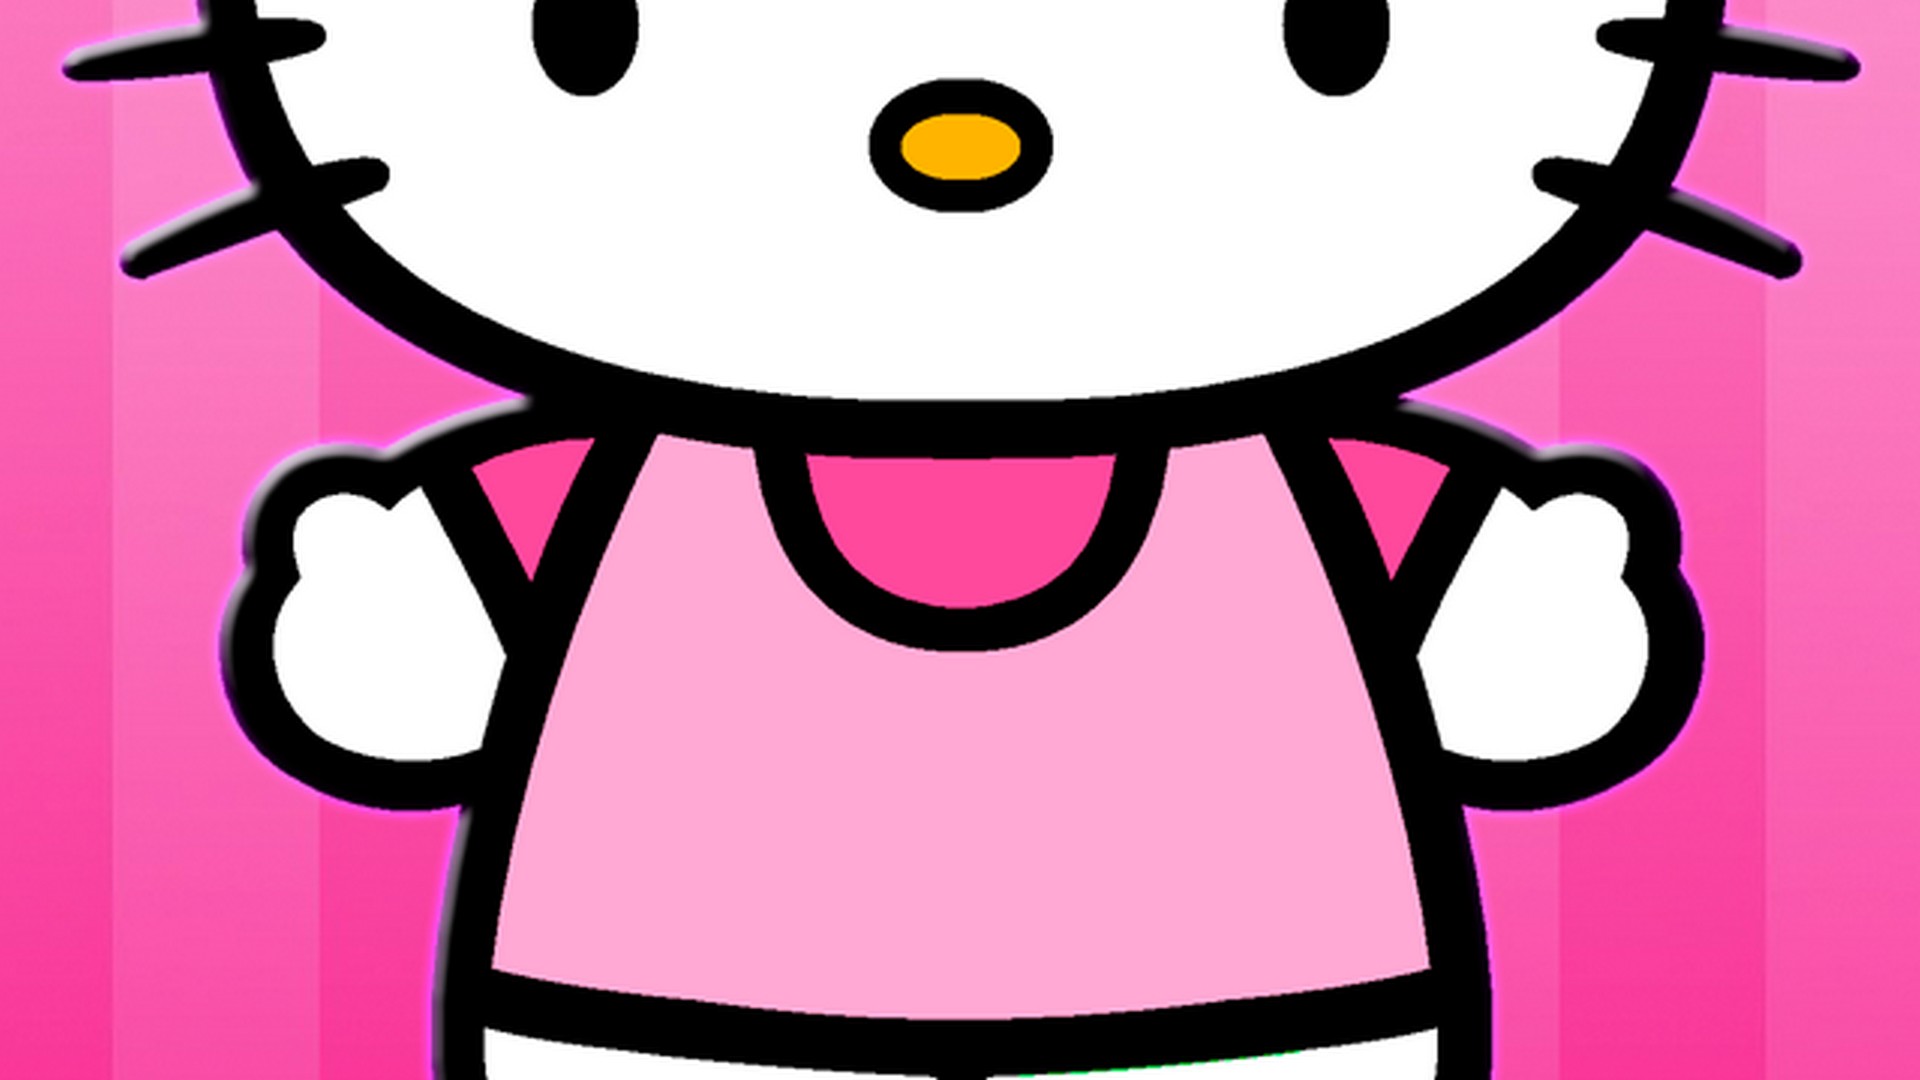 Wallpaper Sanrio Hello Kitty with image resolution 1920x1080 pixel. You can use this wallpaper as background for your desktop Computer Screensavers, Android or iPhone smartphones